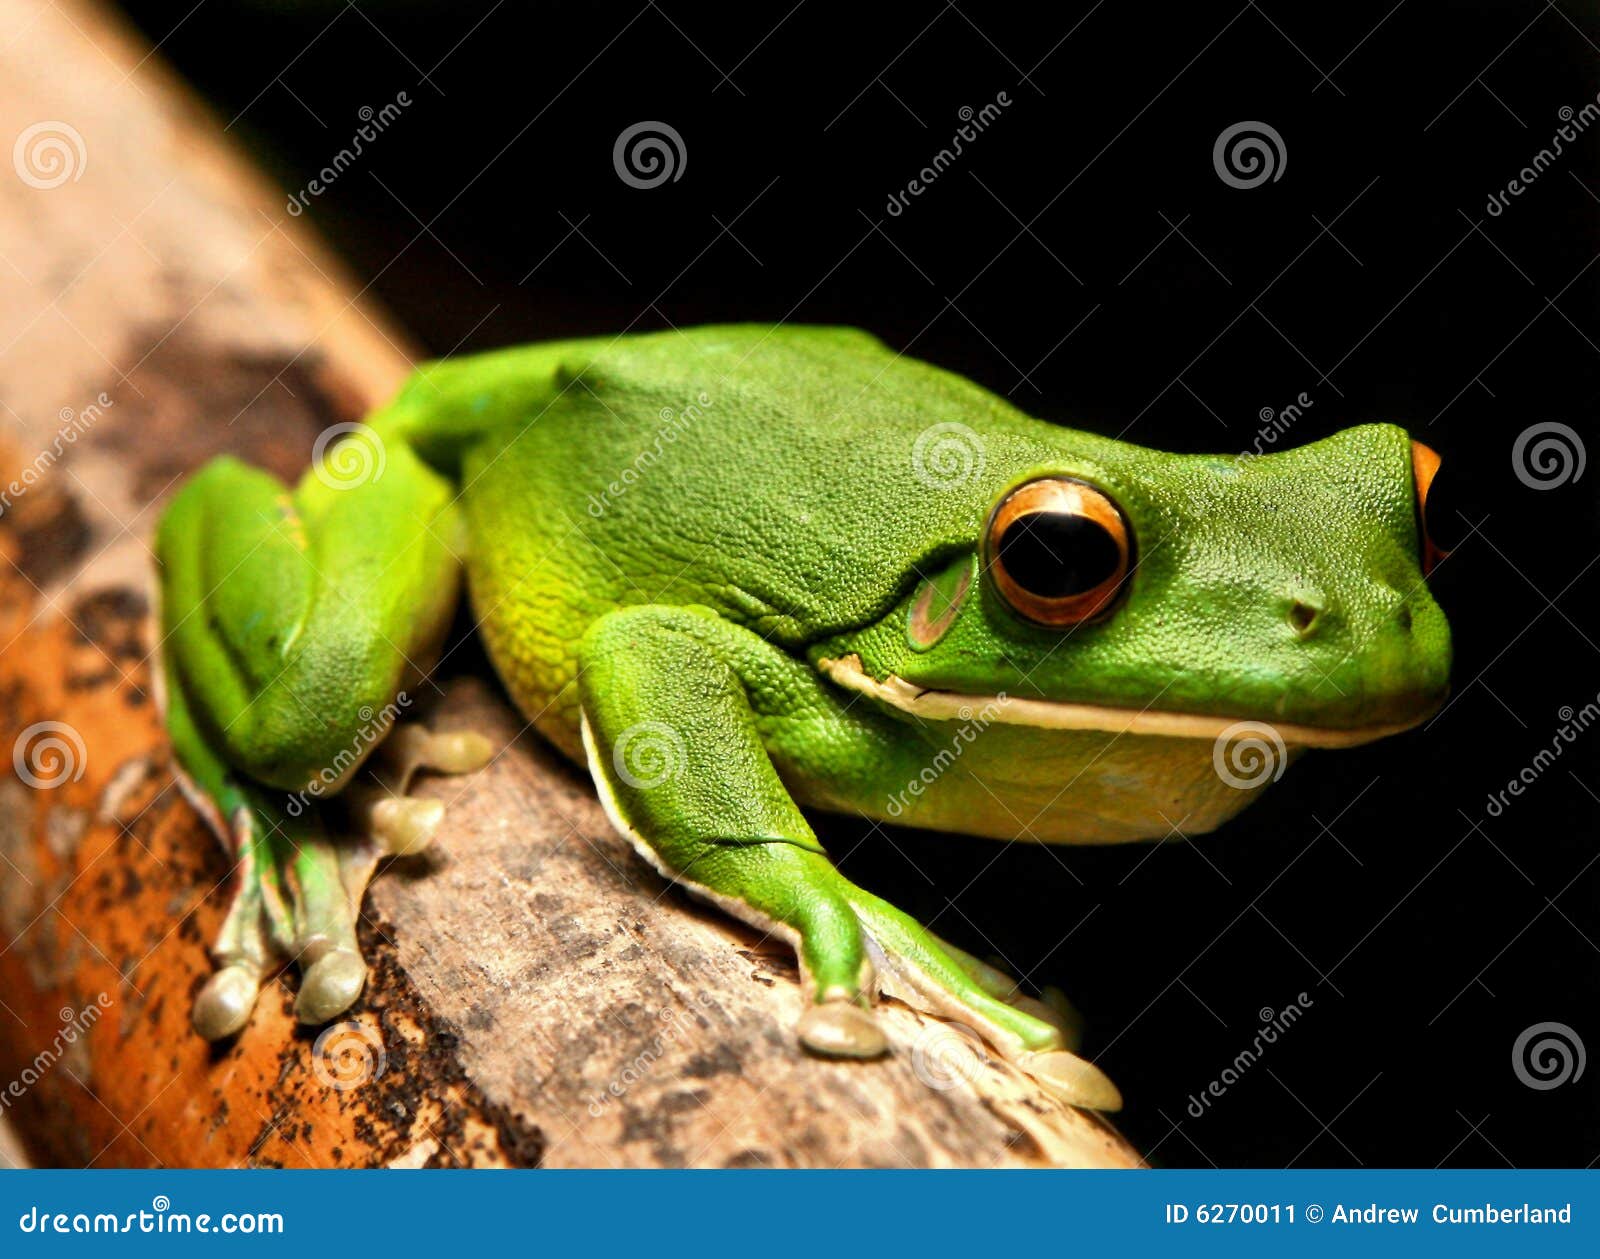 white lipped green frog